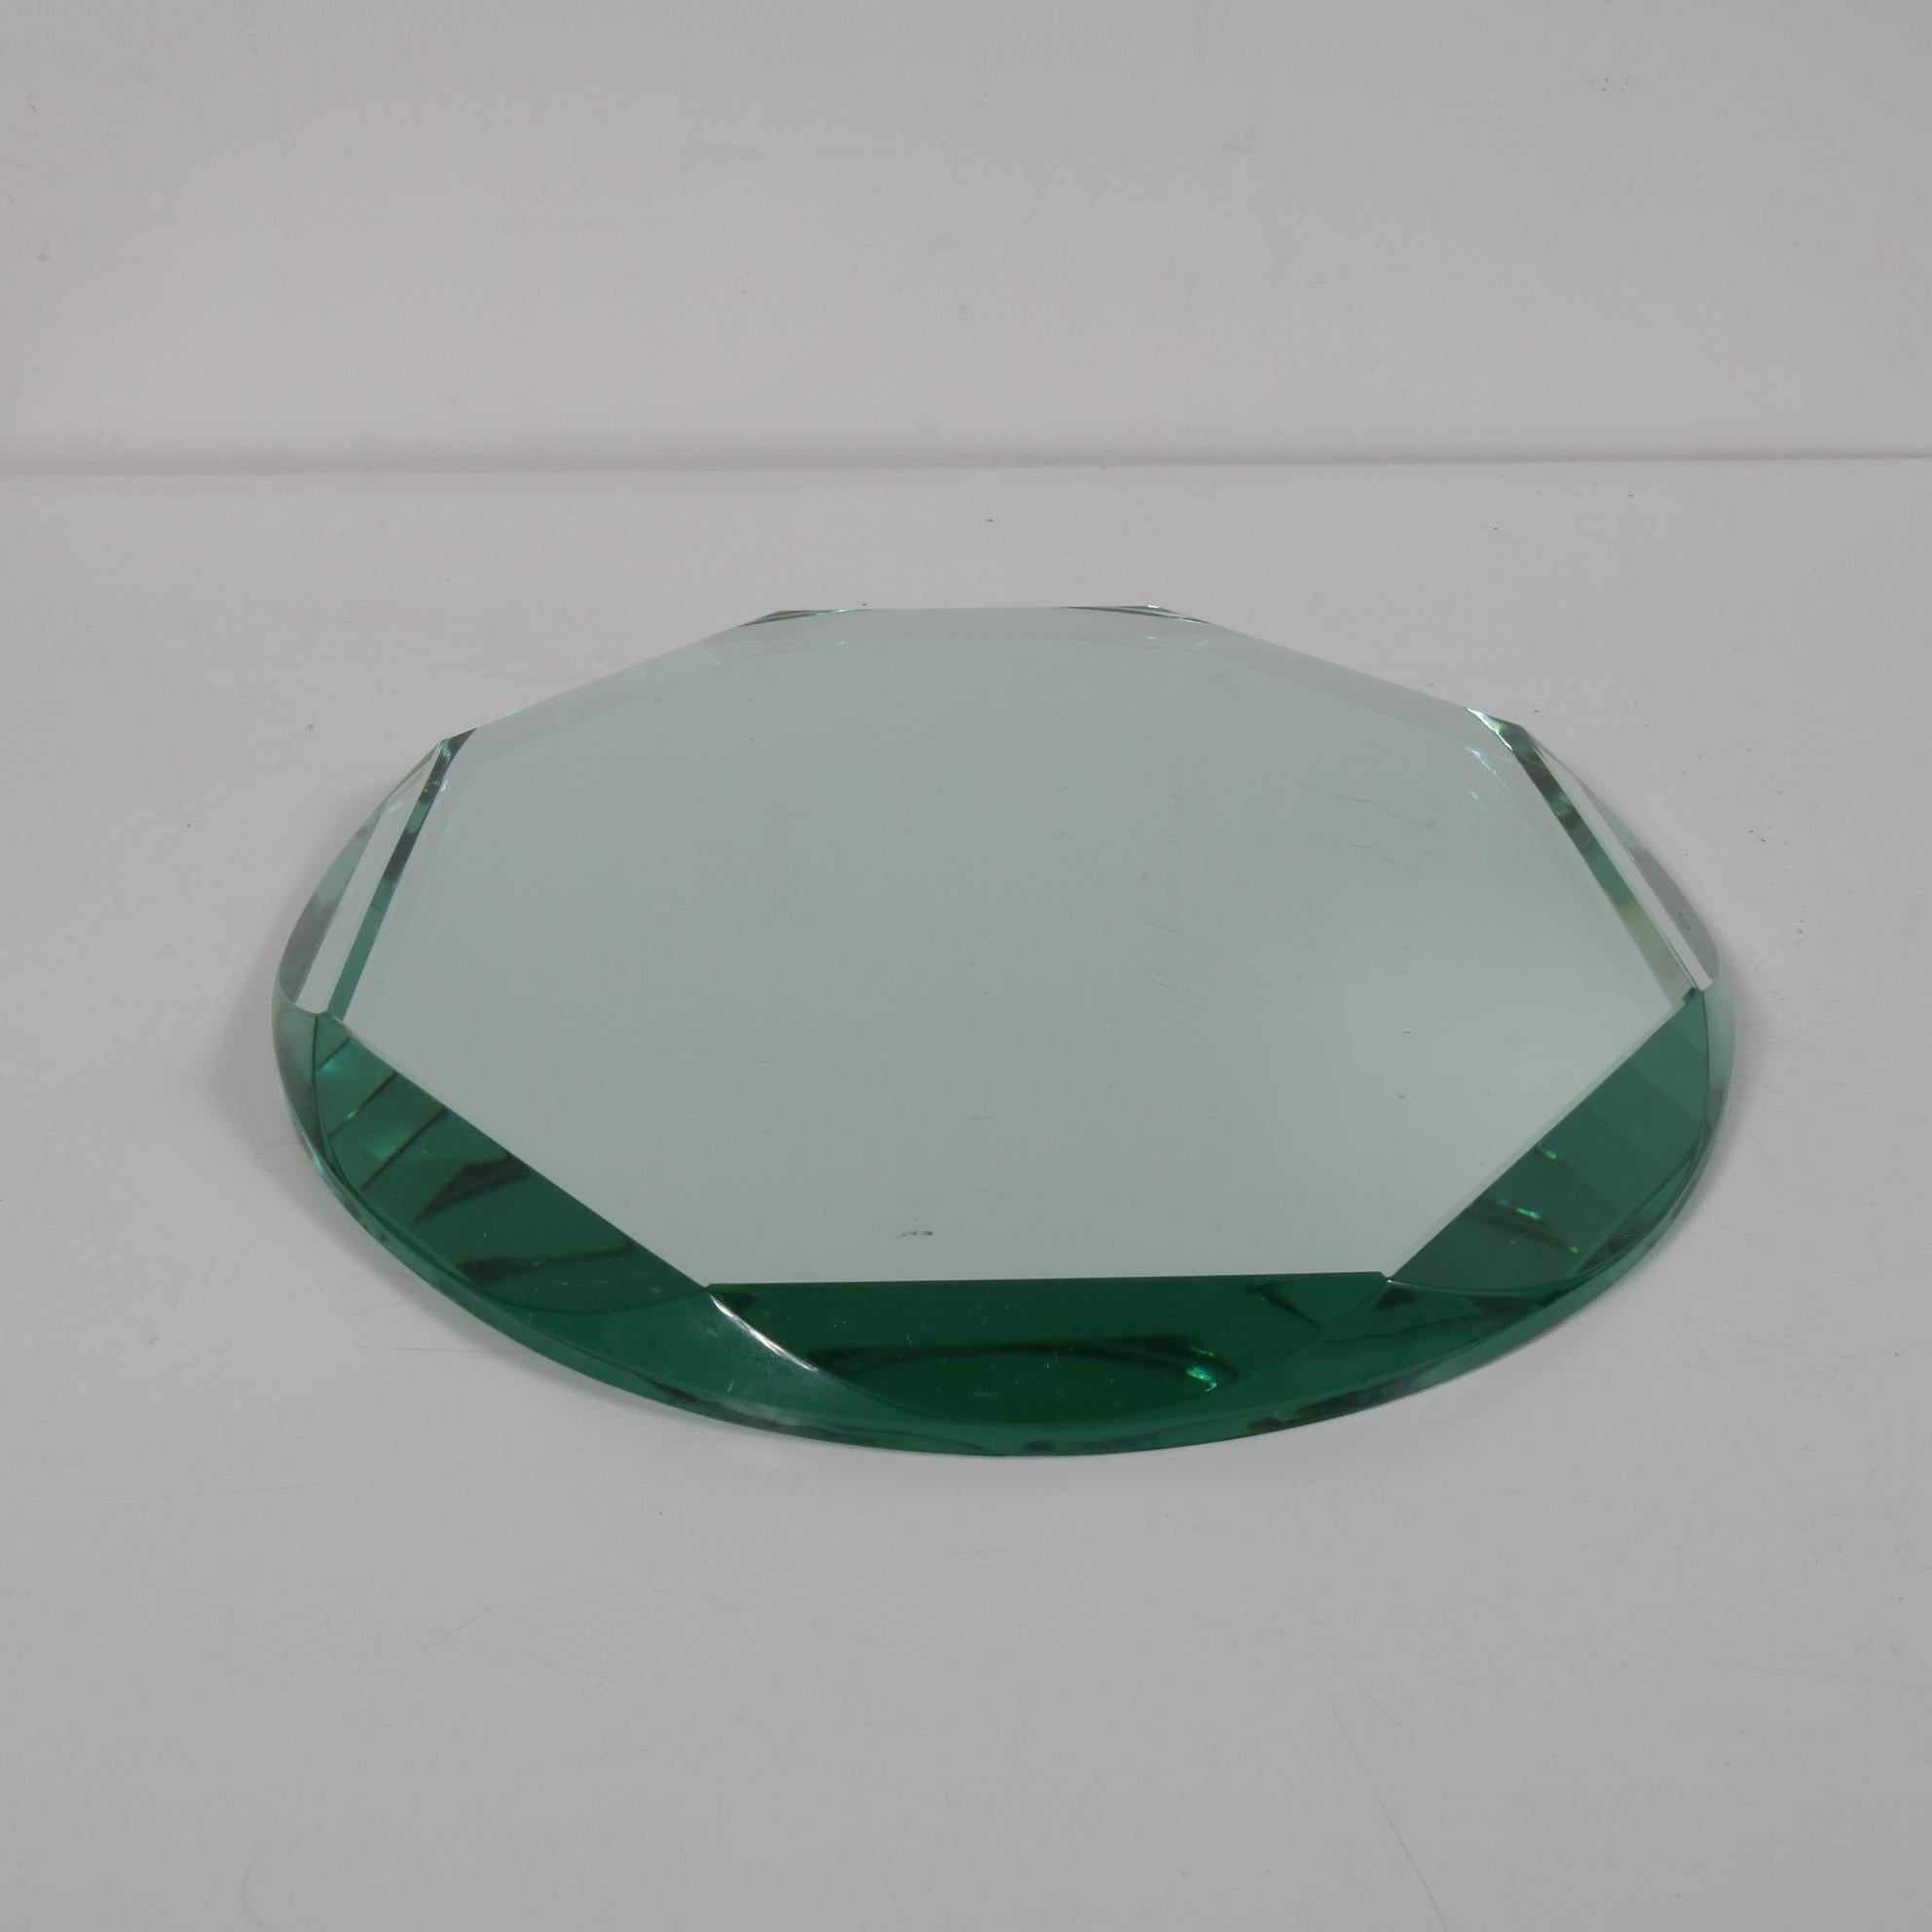 A beautiful Italian centerpiece, manufactured circa 1950.

It is made of high quality mirrored glass with clear glass, diamond polished, beveled edges in different angles. This creates a unique geometric effect. From every angle this piece has a